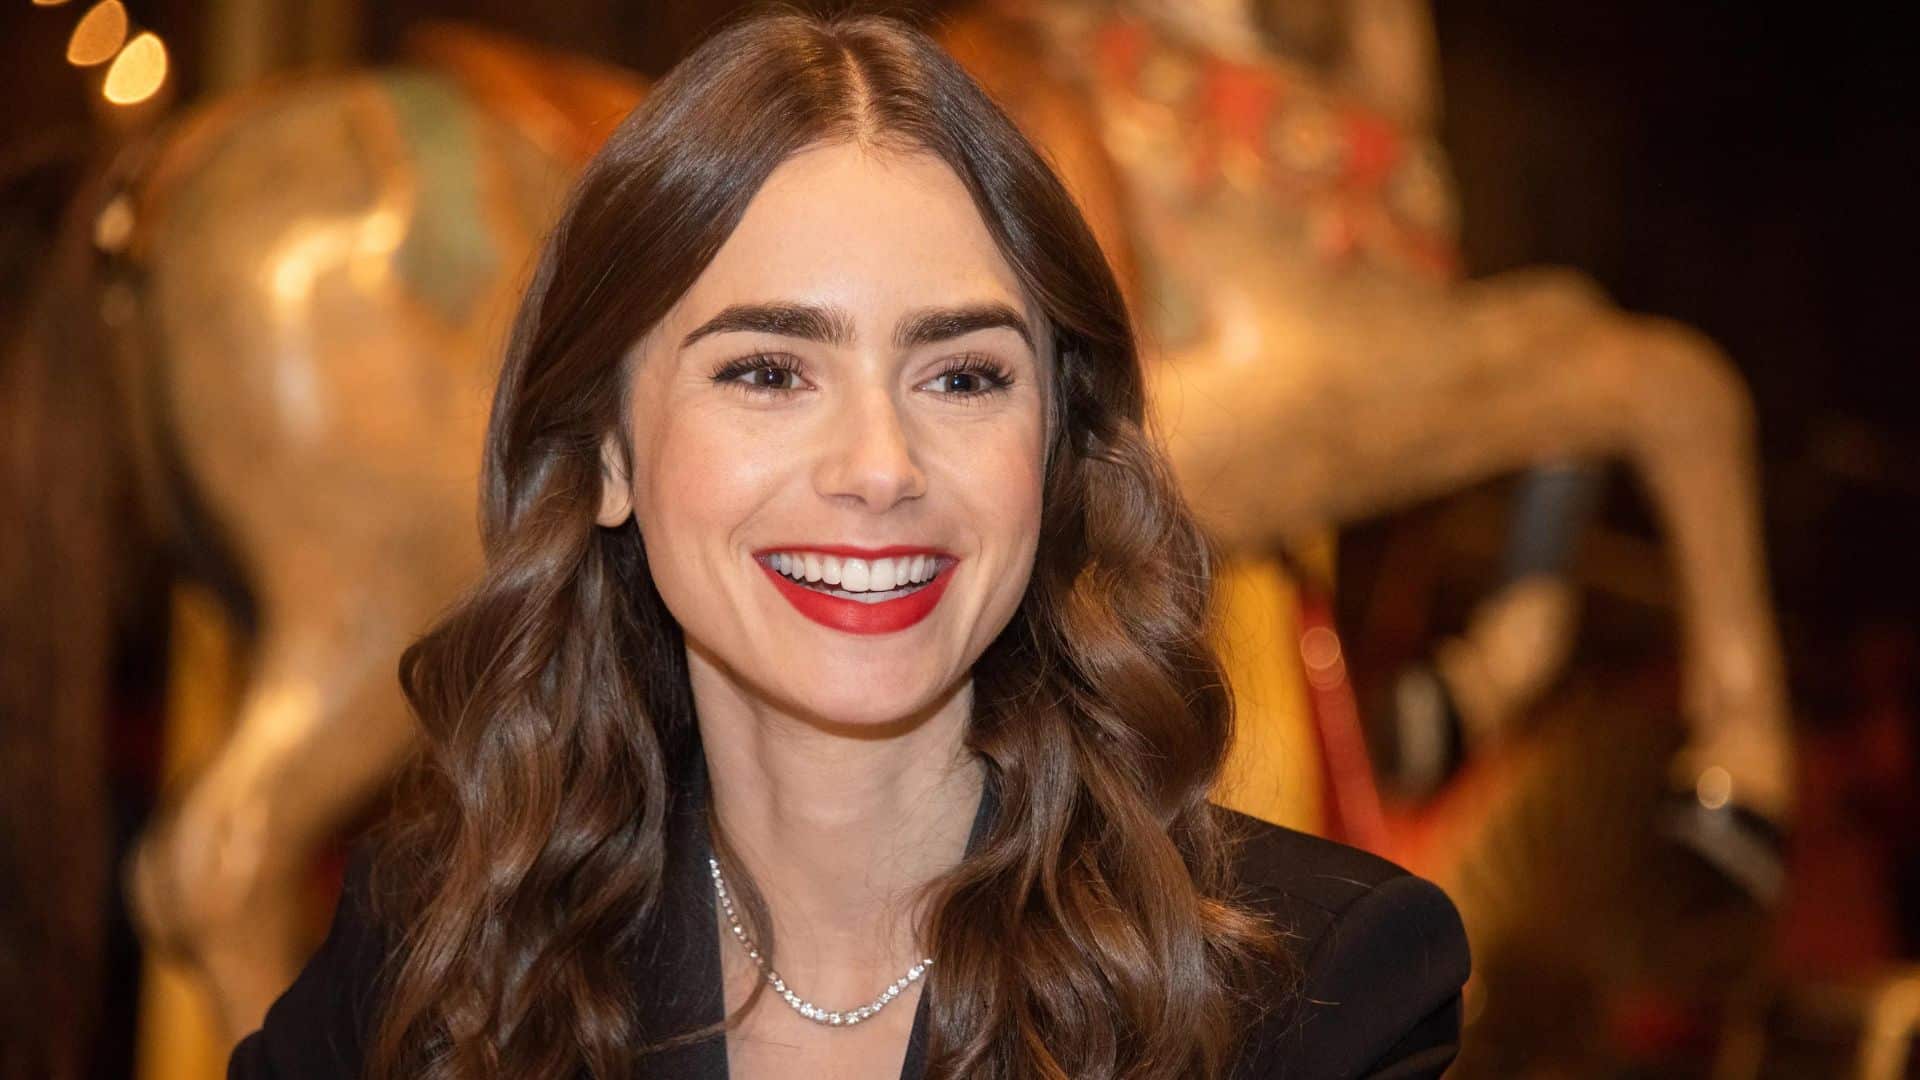 Lily Collins Detailed Information About The Top 10 Beautiful Asian Women